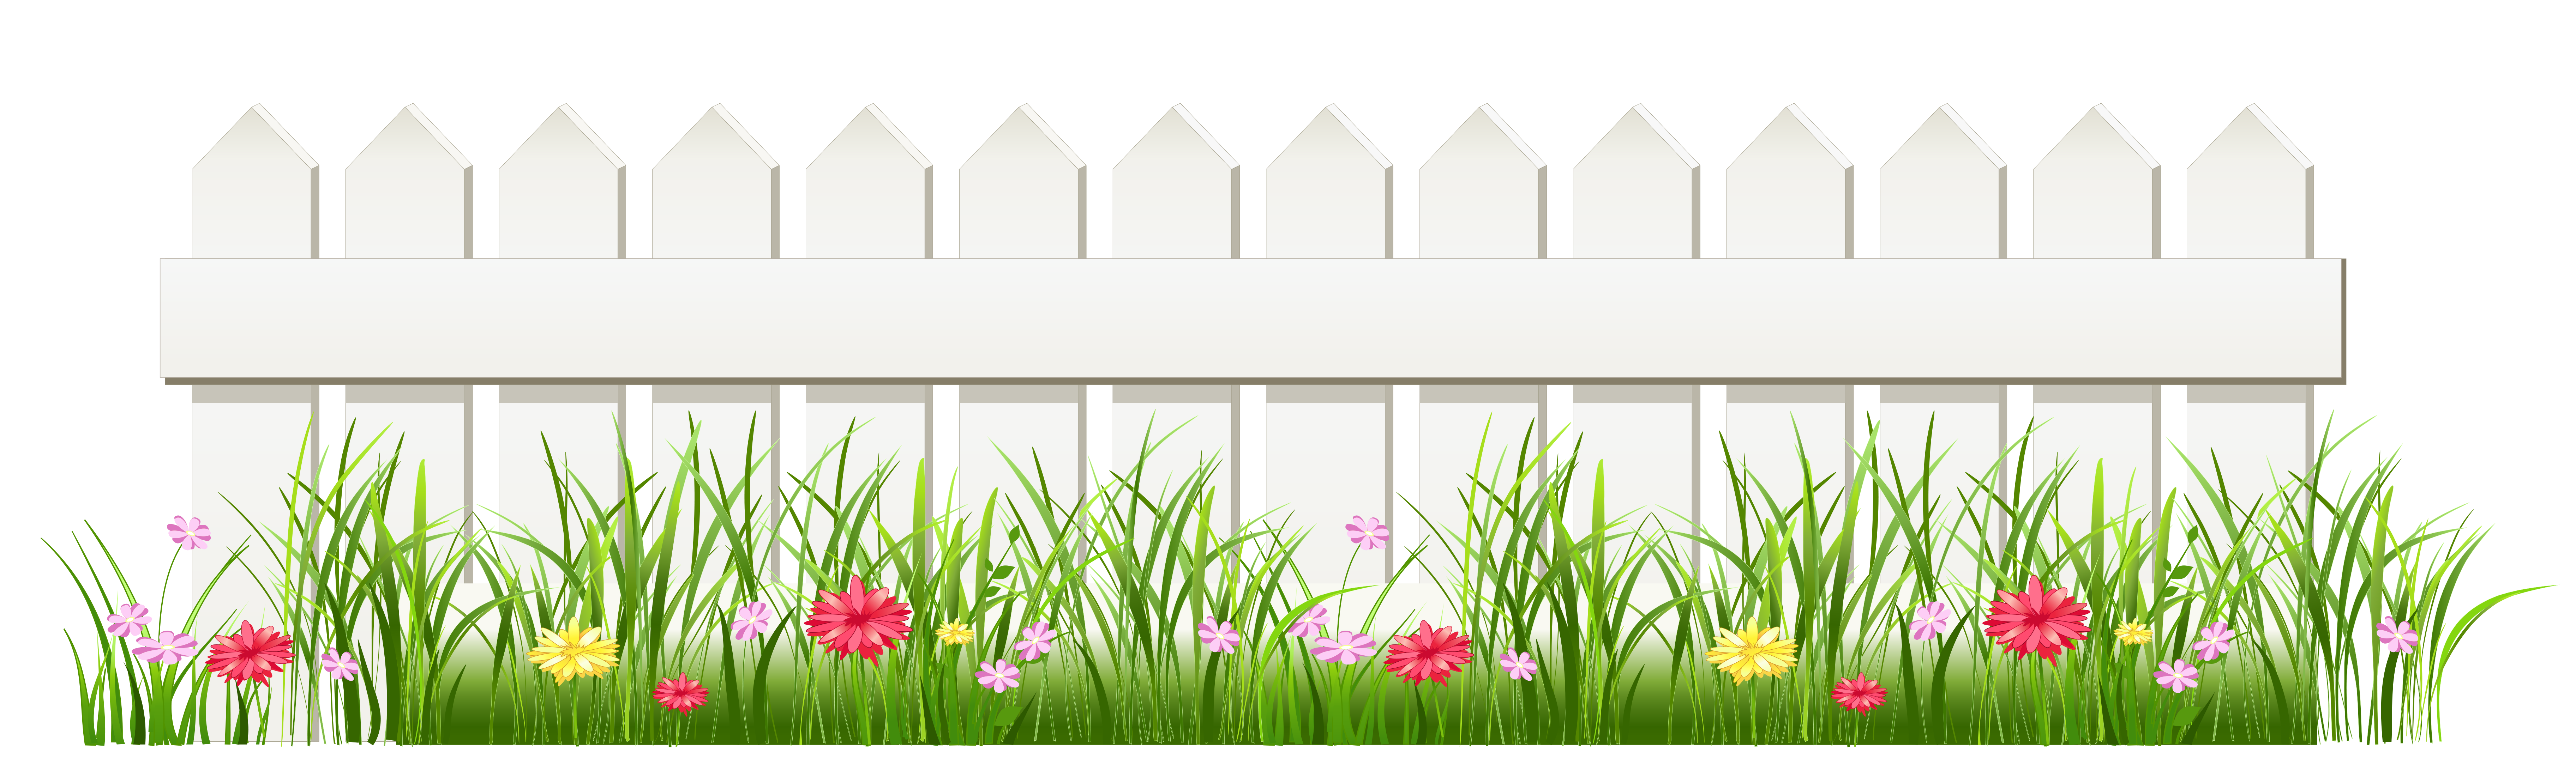 Gate clipart school vegetable garden. Transparent white fence with